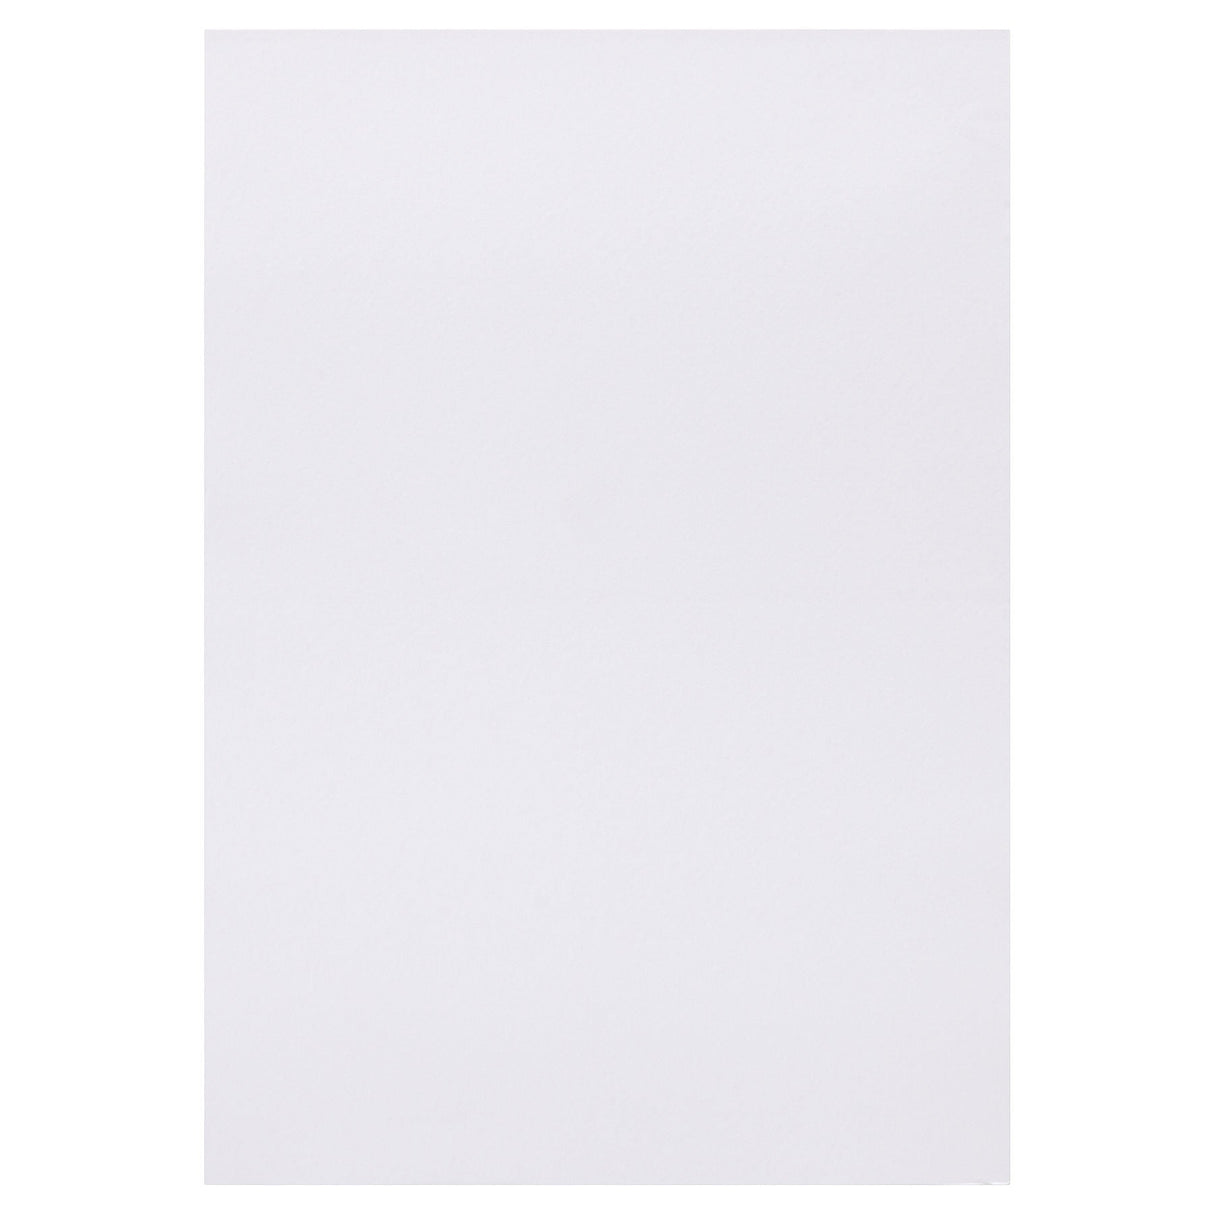 Premier Activity A2 Card - 160gsm - White - 100 Sheets | Stationery Shop UK